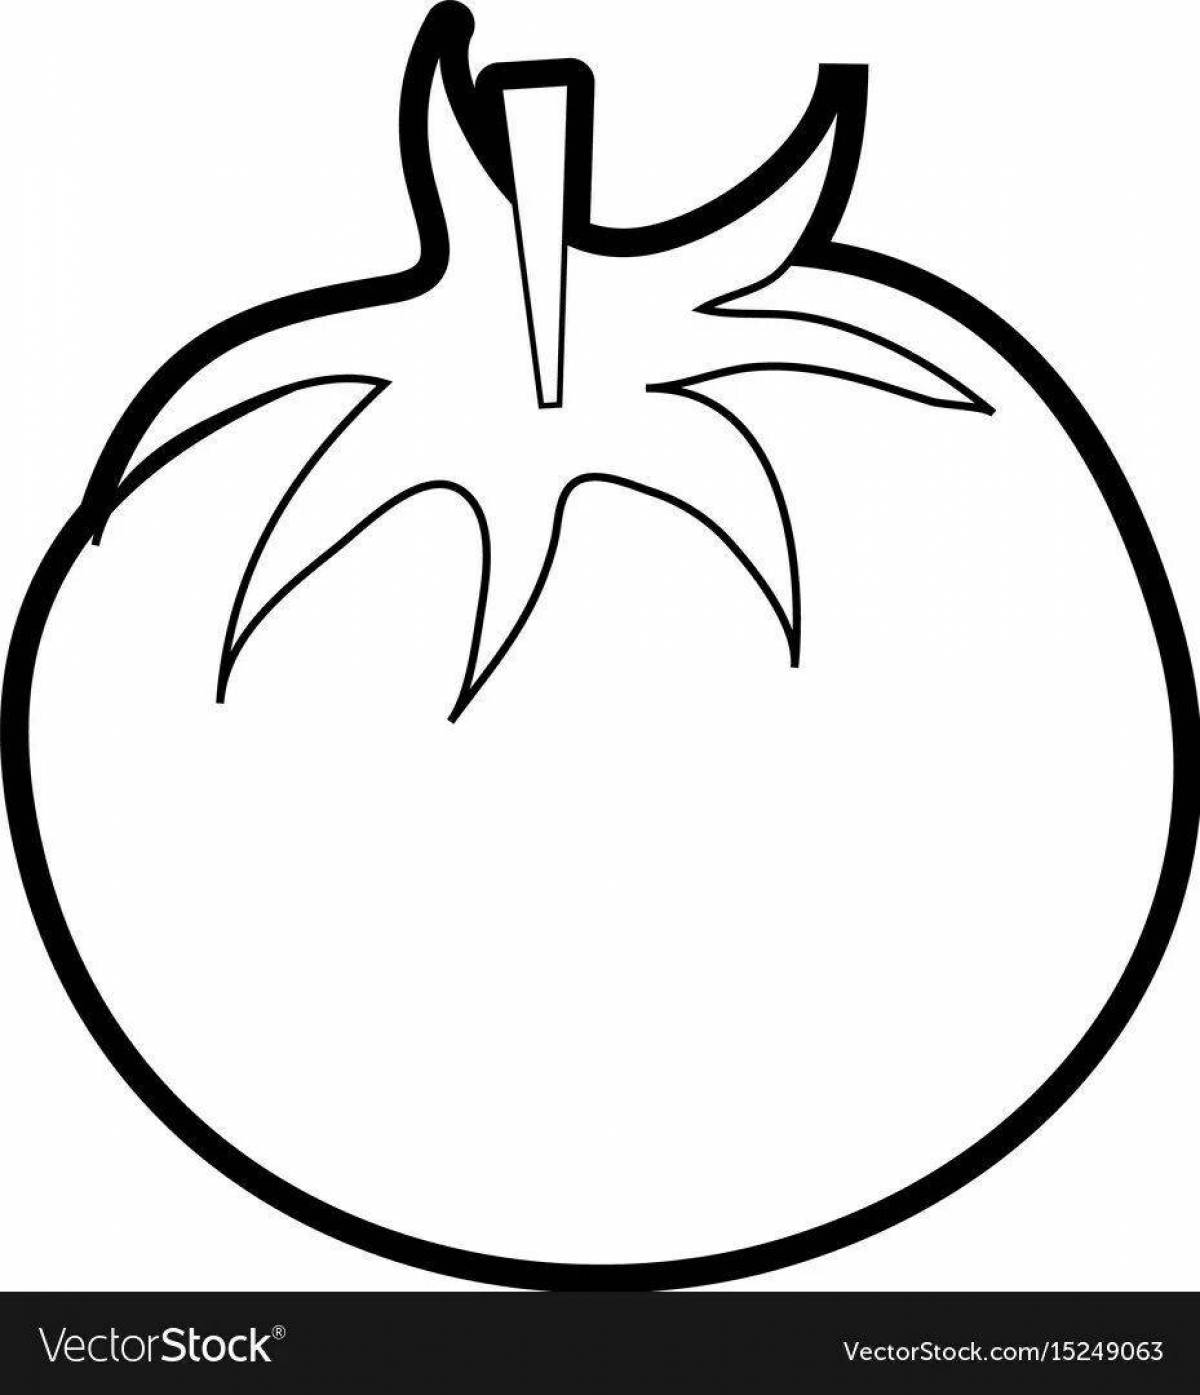 Coloring pages with tomatoes for children 3-4 years old